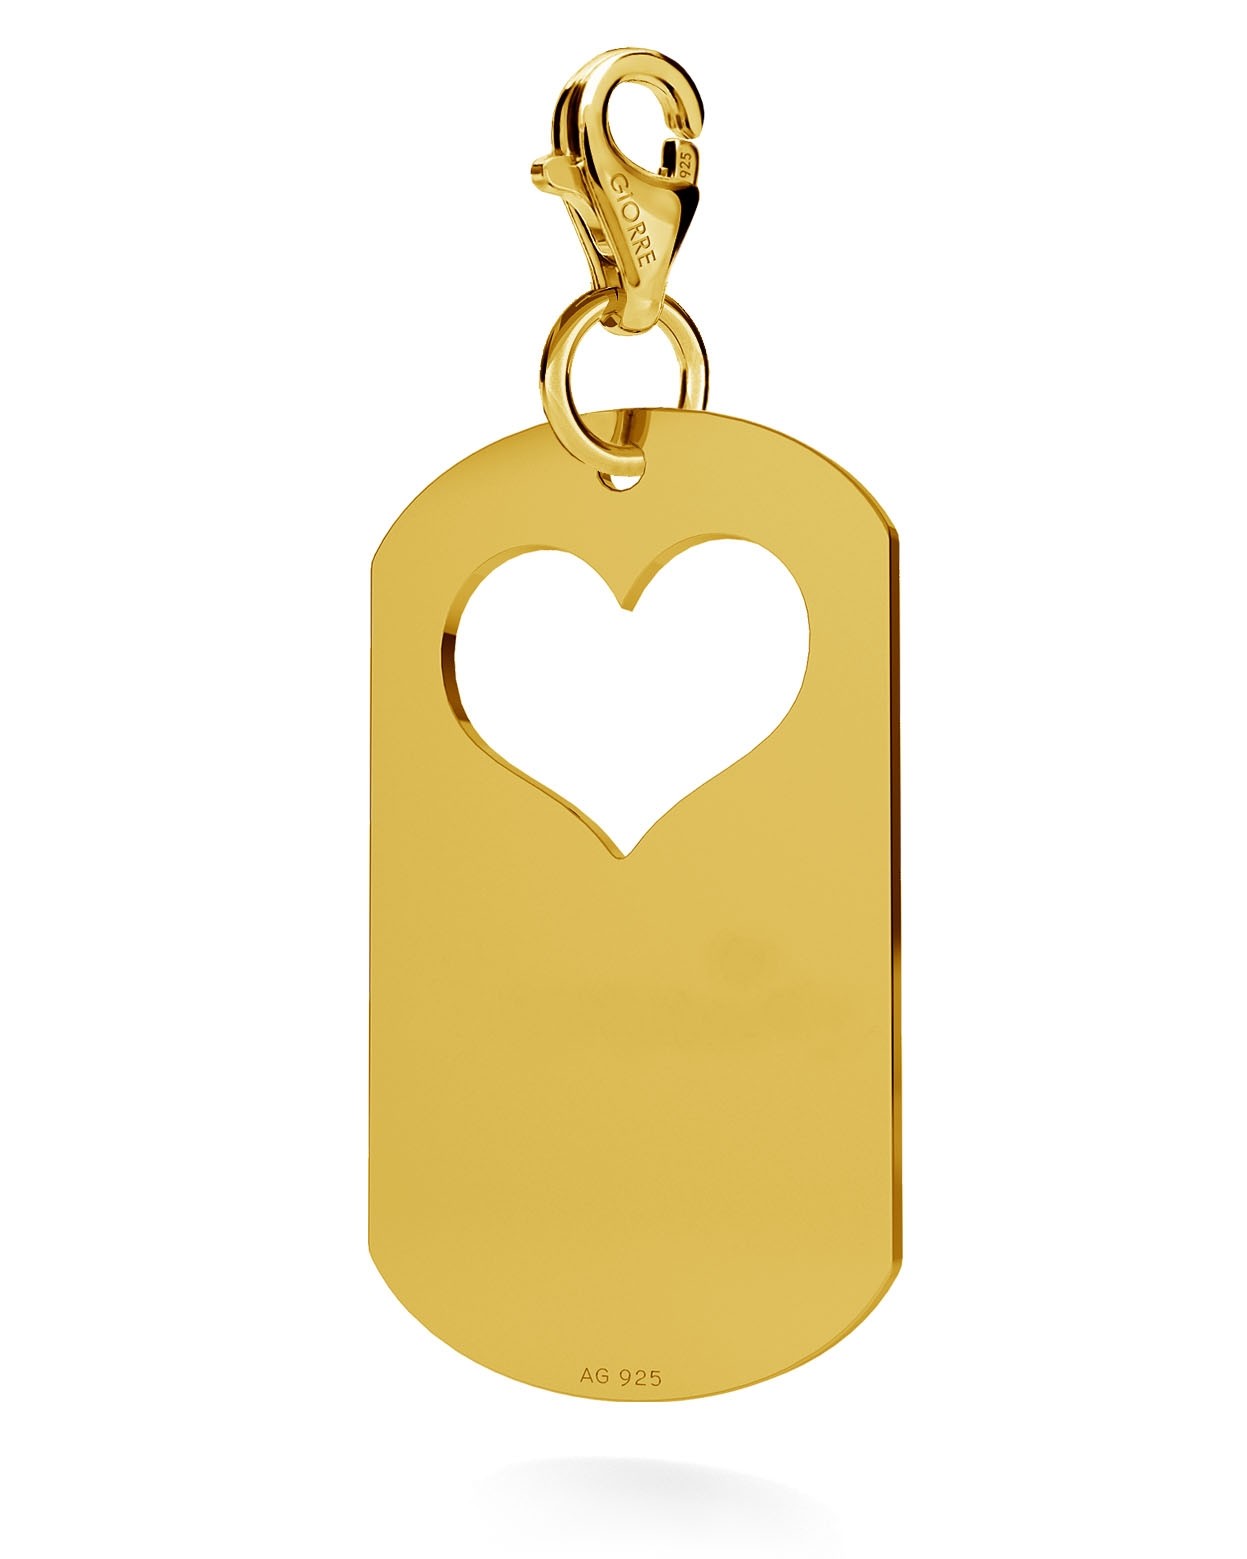 CHARM 76, HEART DOG TAG WITH ENGRAVE SILVER 925, RHODIUM OR GOLD PLATED